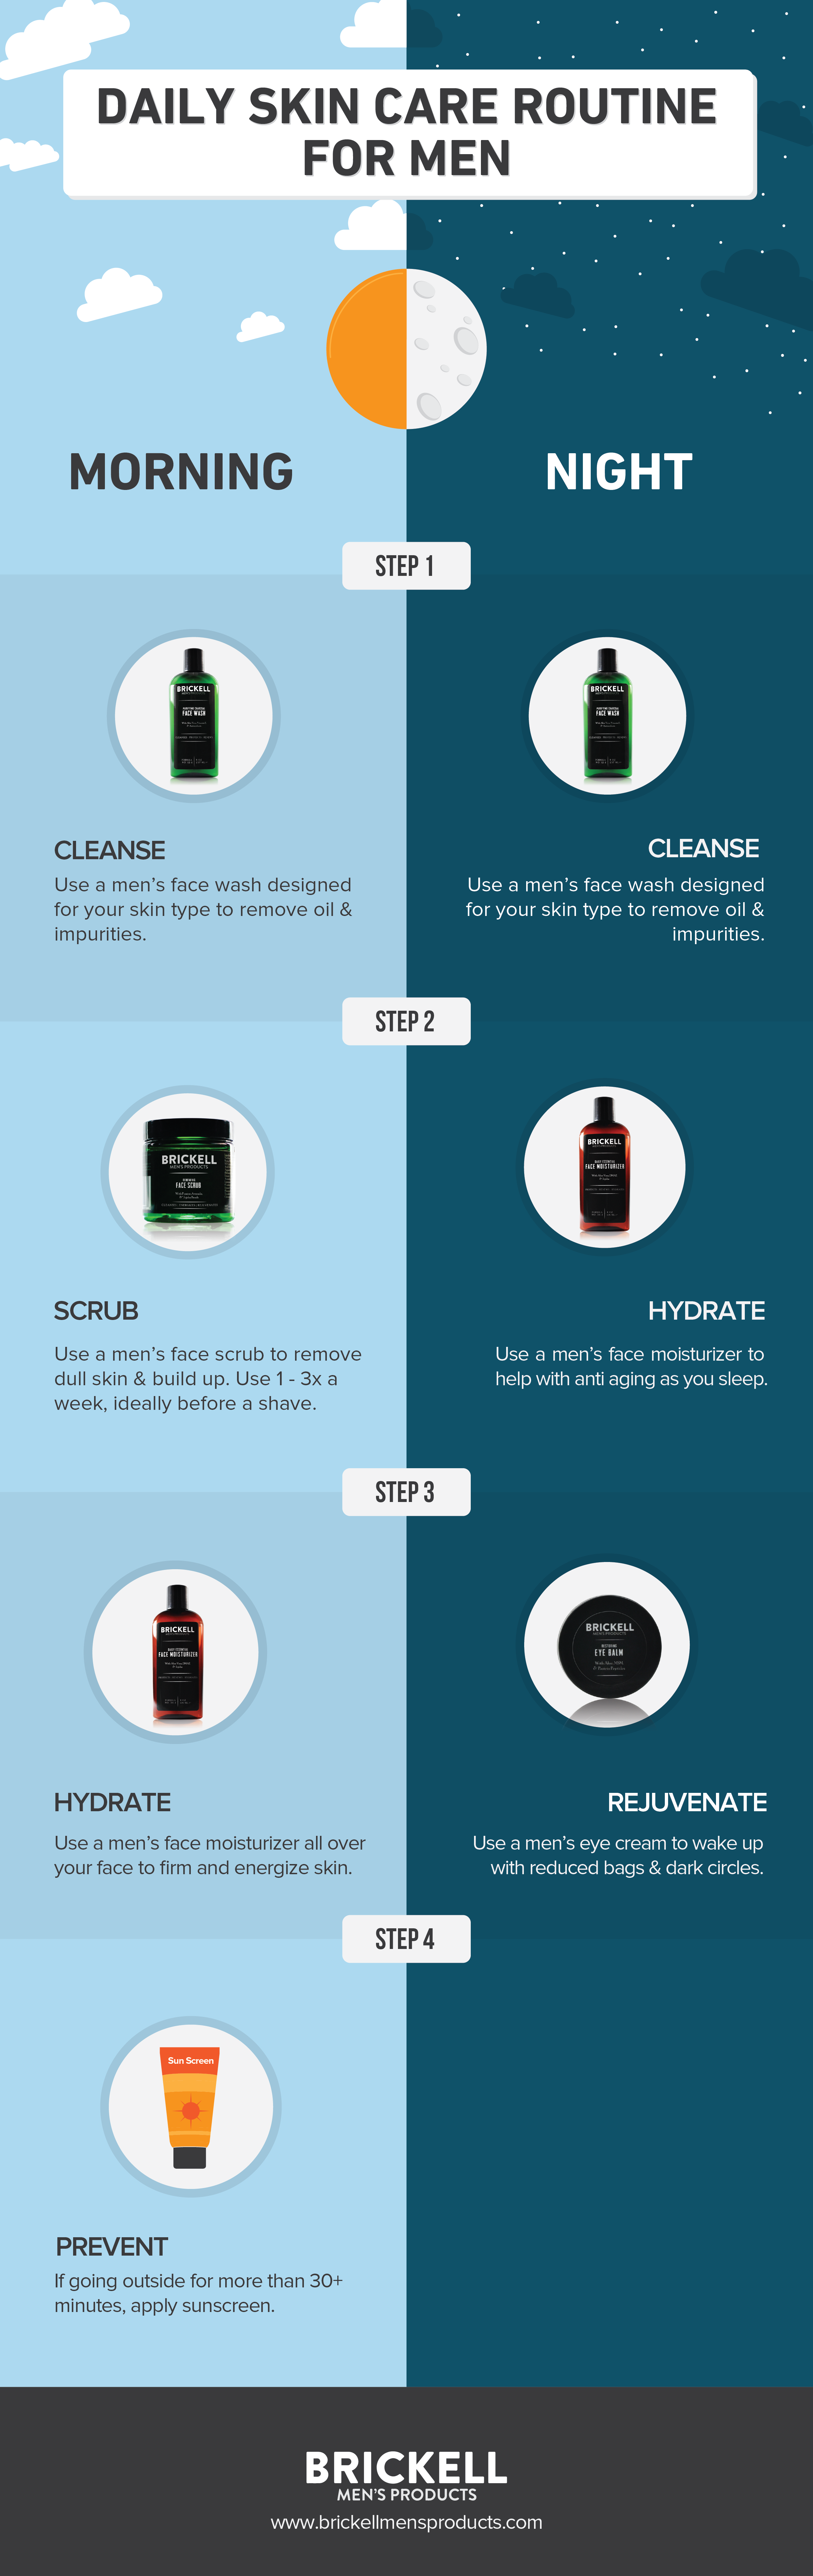 Men's daily skin care routine infographic